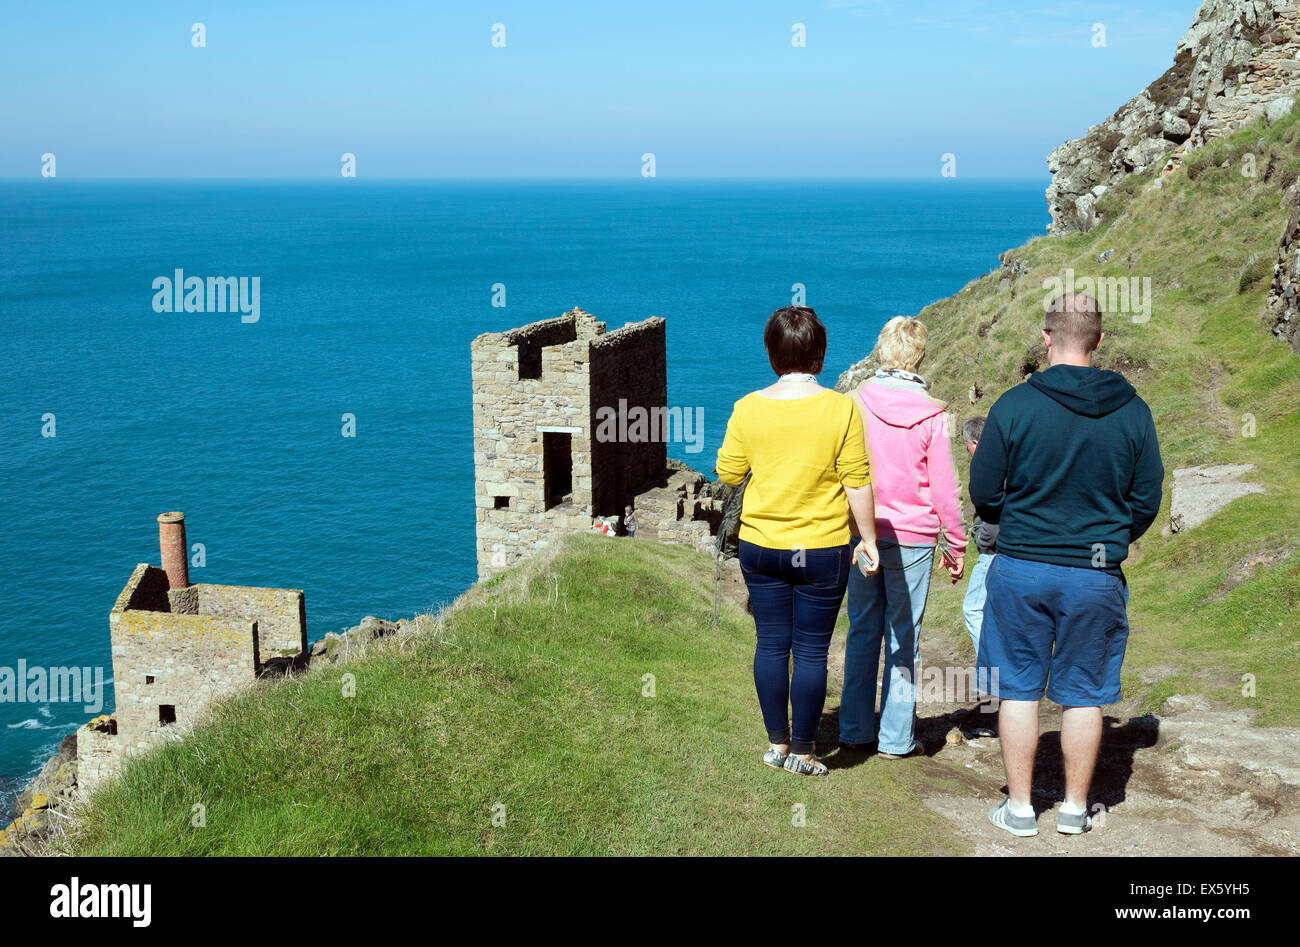 Tourists visiting Botallack Crowns Tin MIne in Cornwall, England, UK,  one of the Poldark television series filming locations. Stock Photo